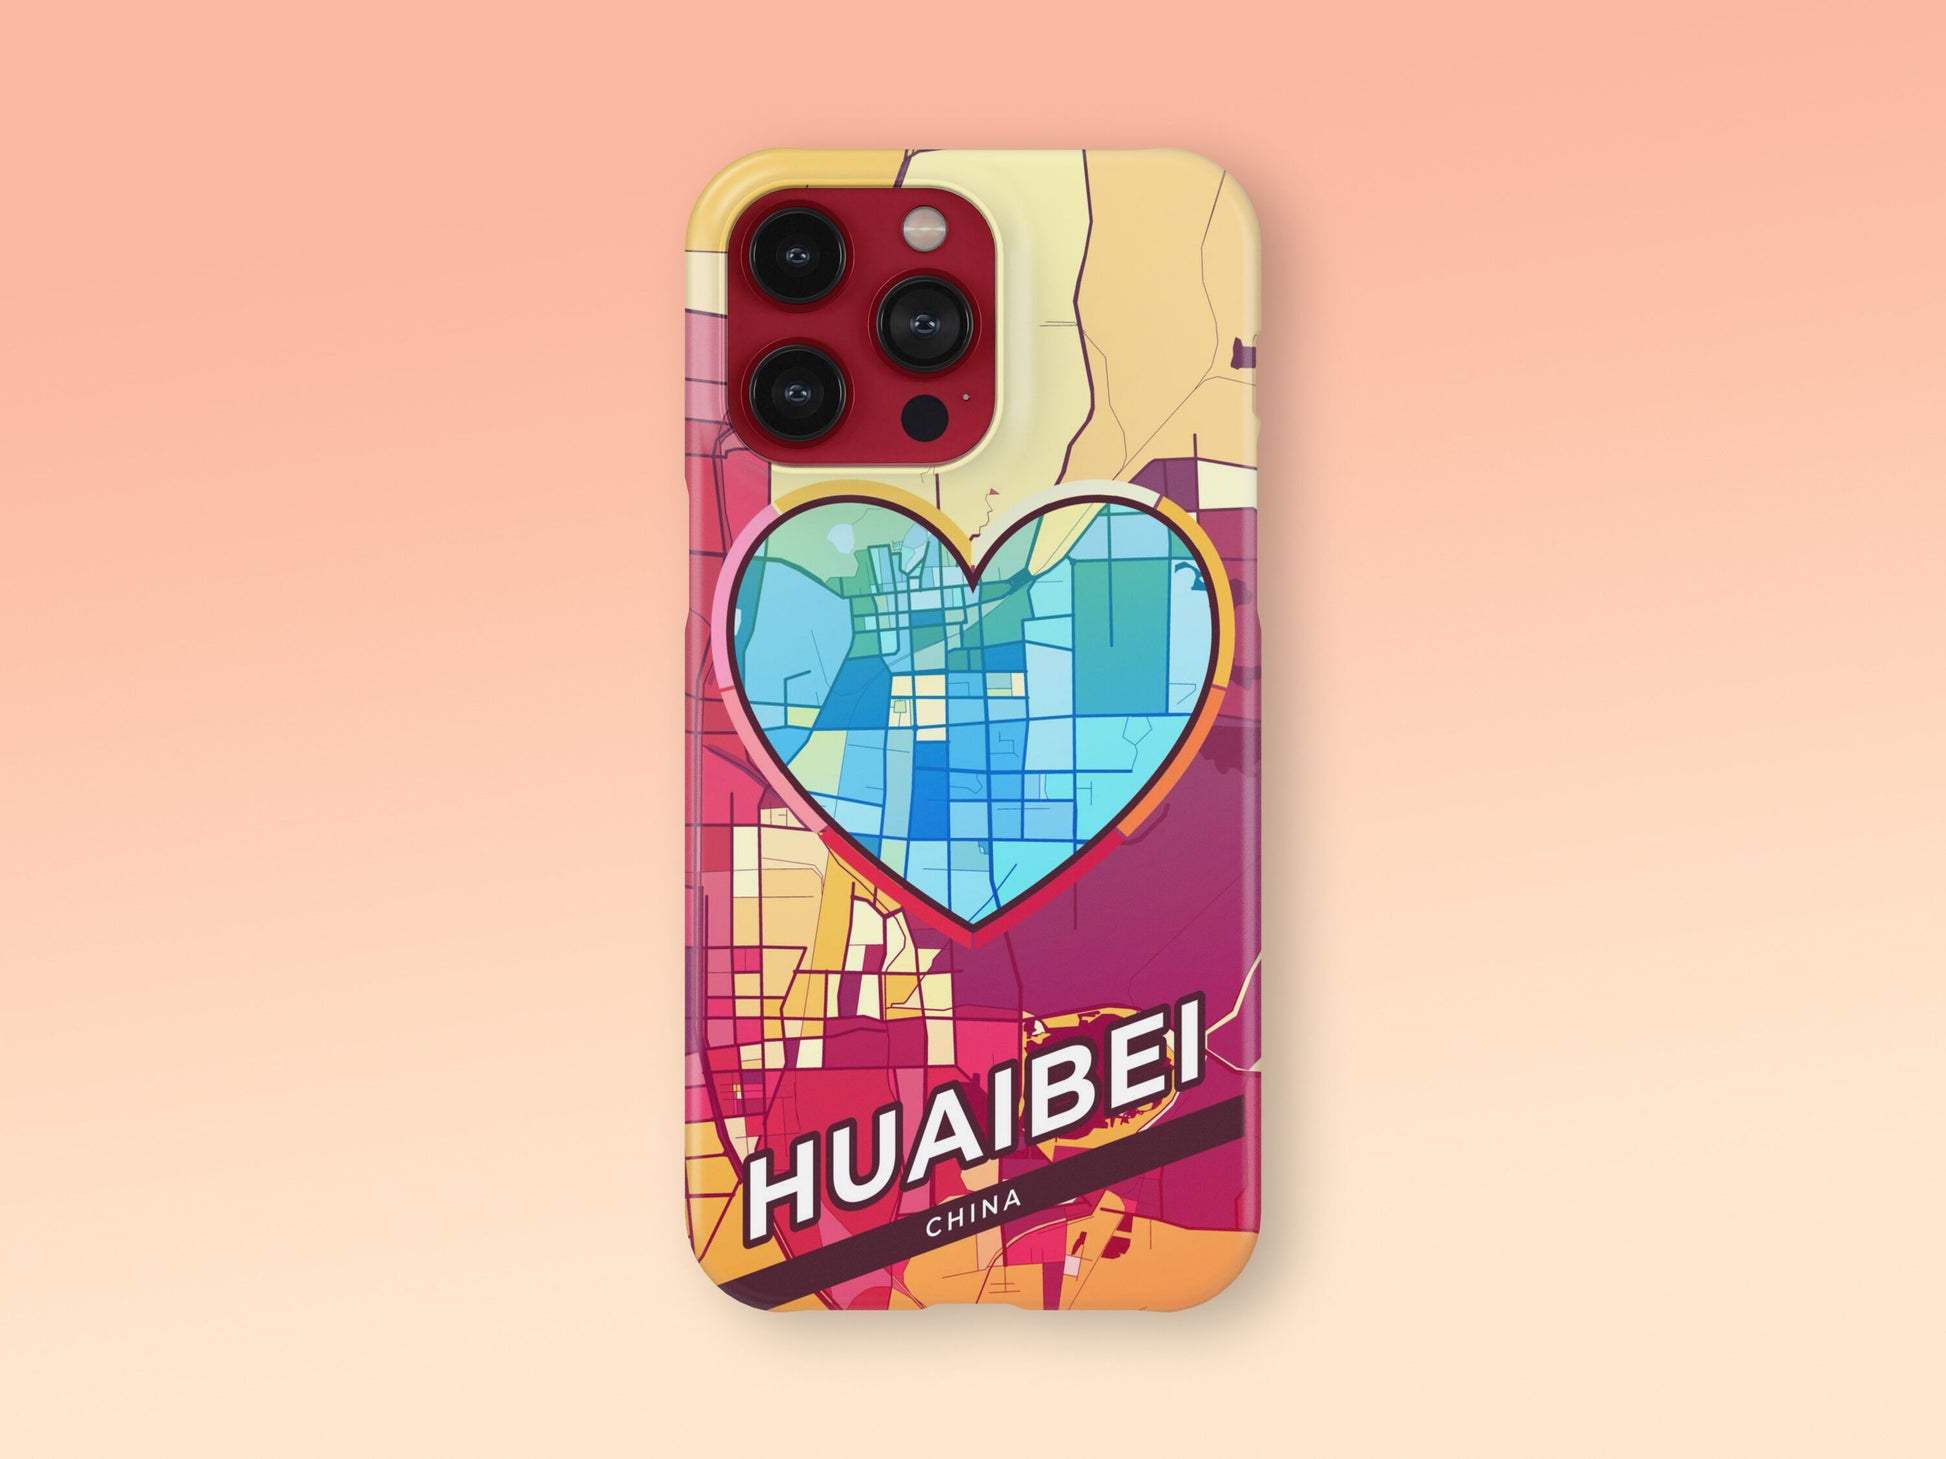 Huaibei China slim phone case with colorful icon. Birthday, wedding or housewarming gift. Couple match cases. 2